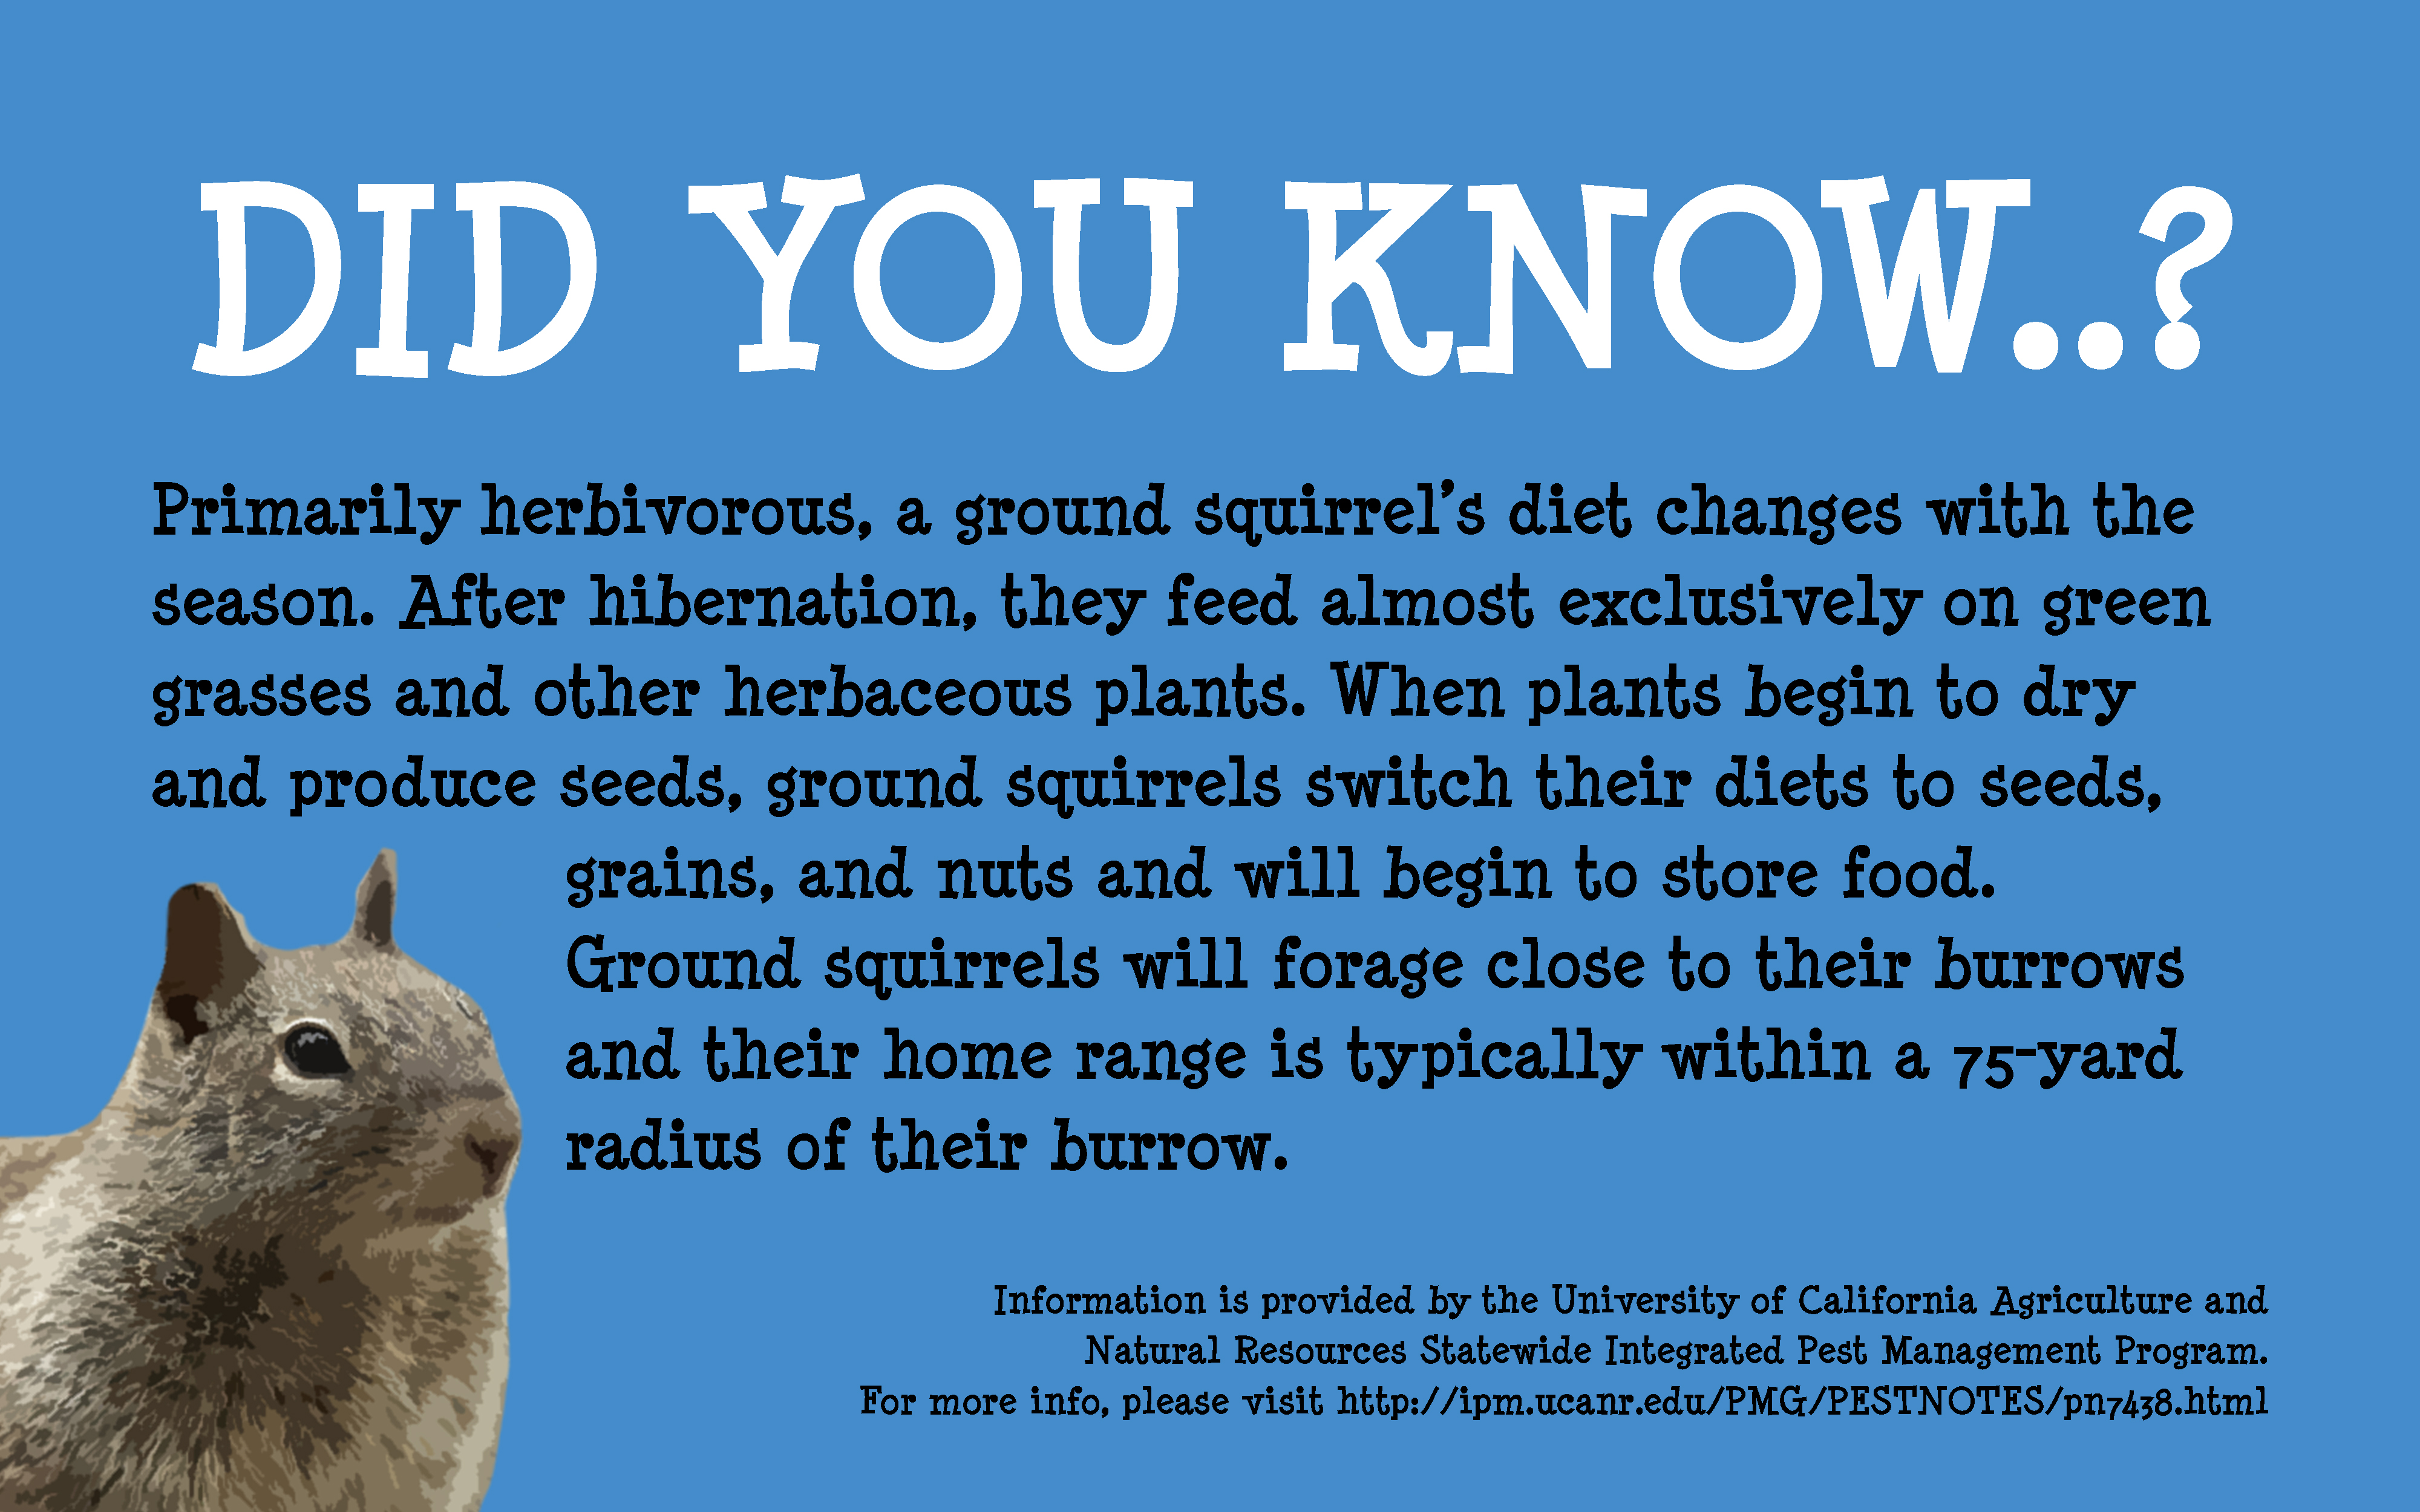 DID-YOU-KNOW-Ground-Squirrels-Eat